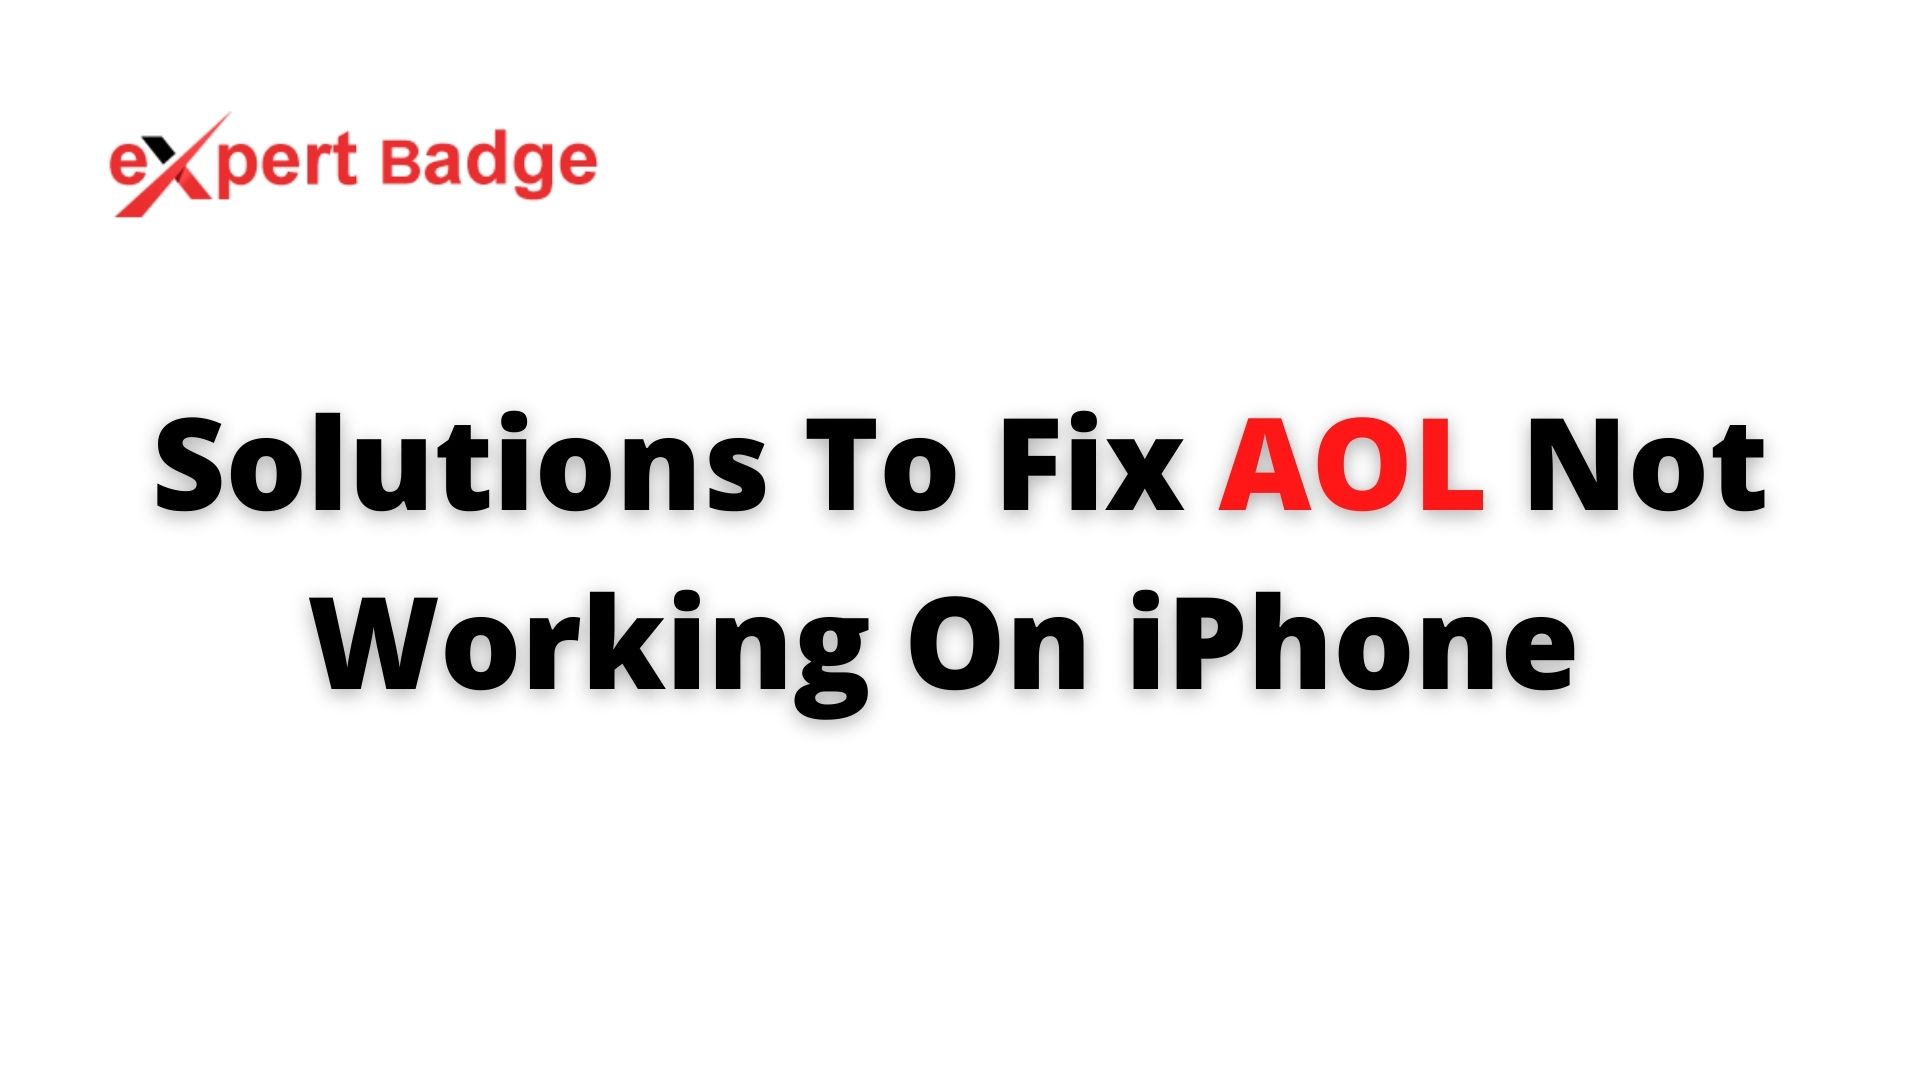 Article about 8 Solutions To Fix AOL Not Working On iPhone 